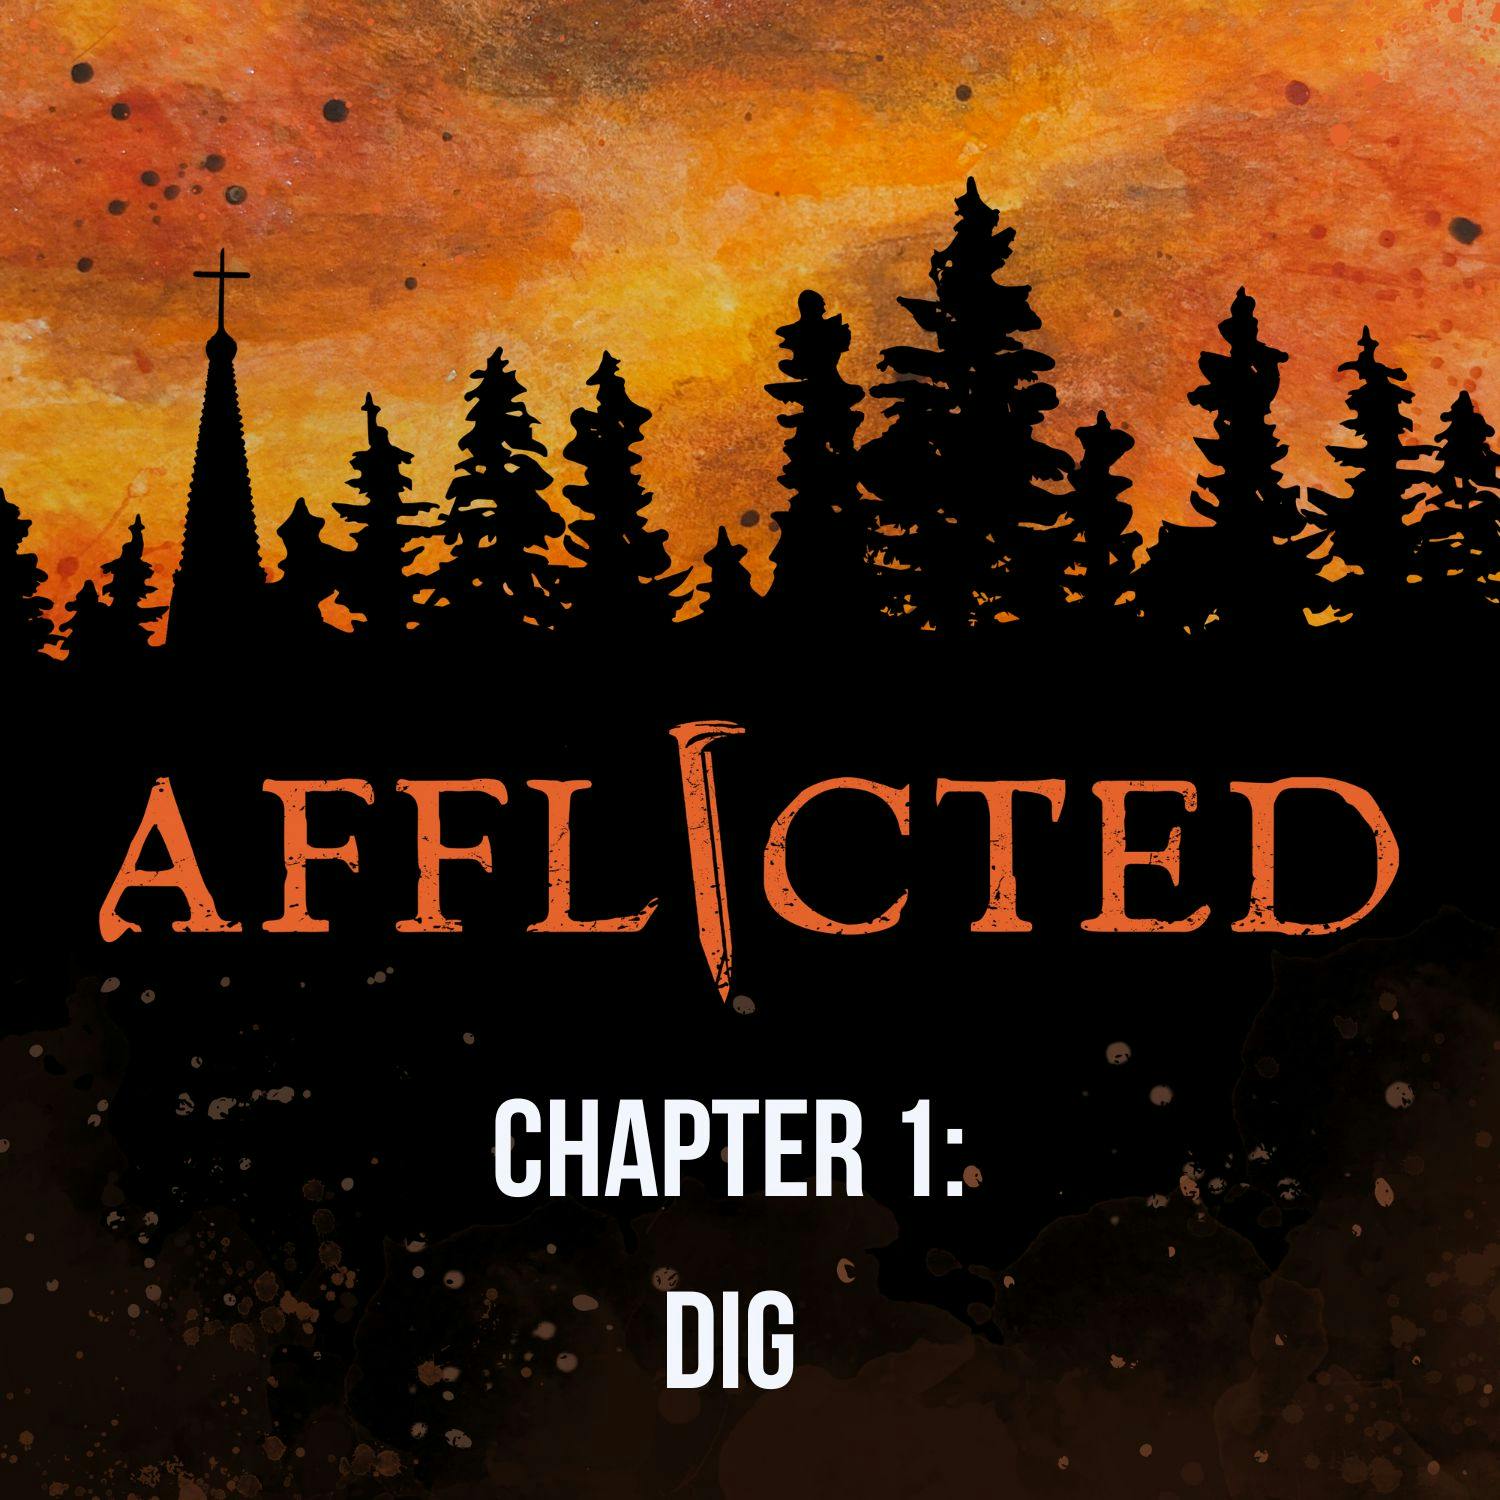 Chapter 1: Dig